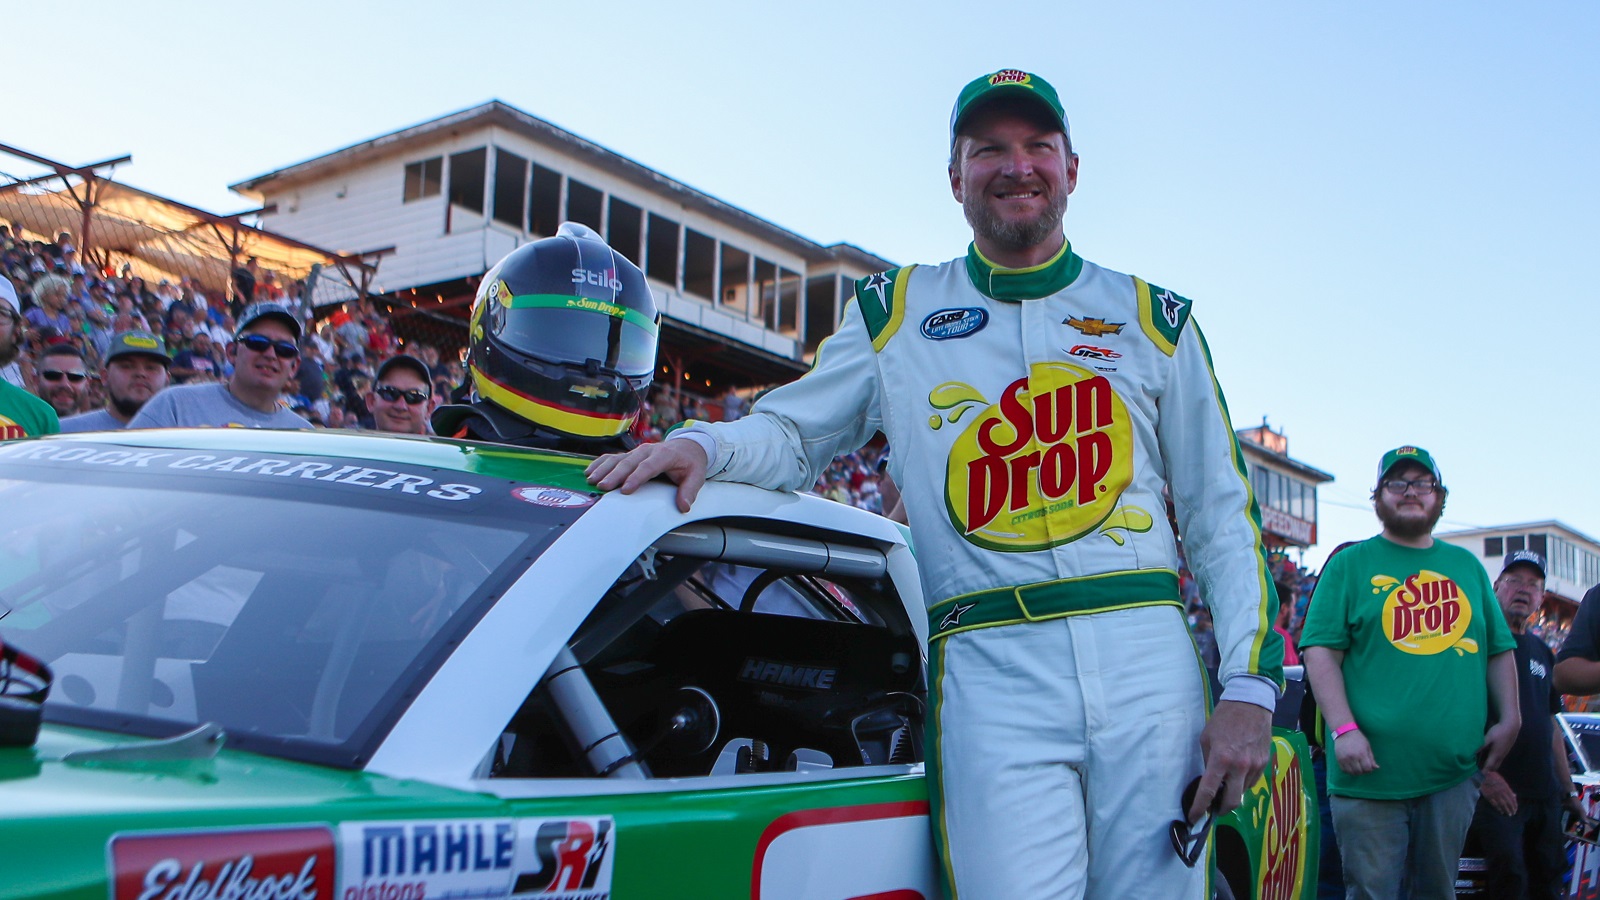 Dale Earnhardt Jr. stands next to his car on the starting grid moments before the Cars Tour LMSC 125 on Aug 31, 2022, at the North Wilkesboro Speedway.